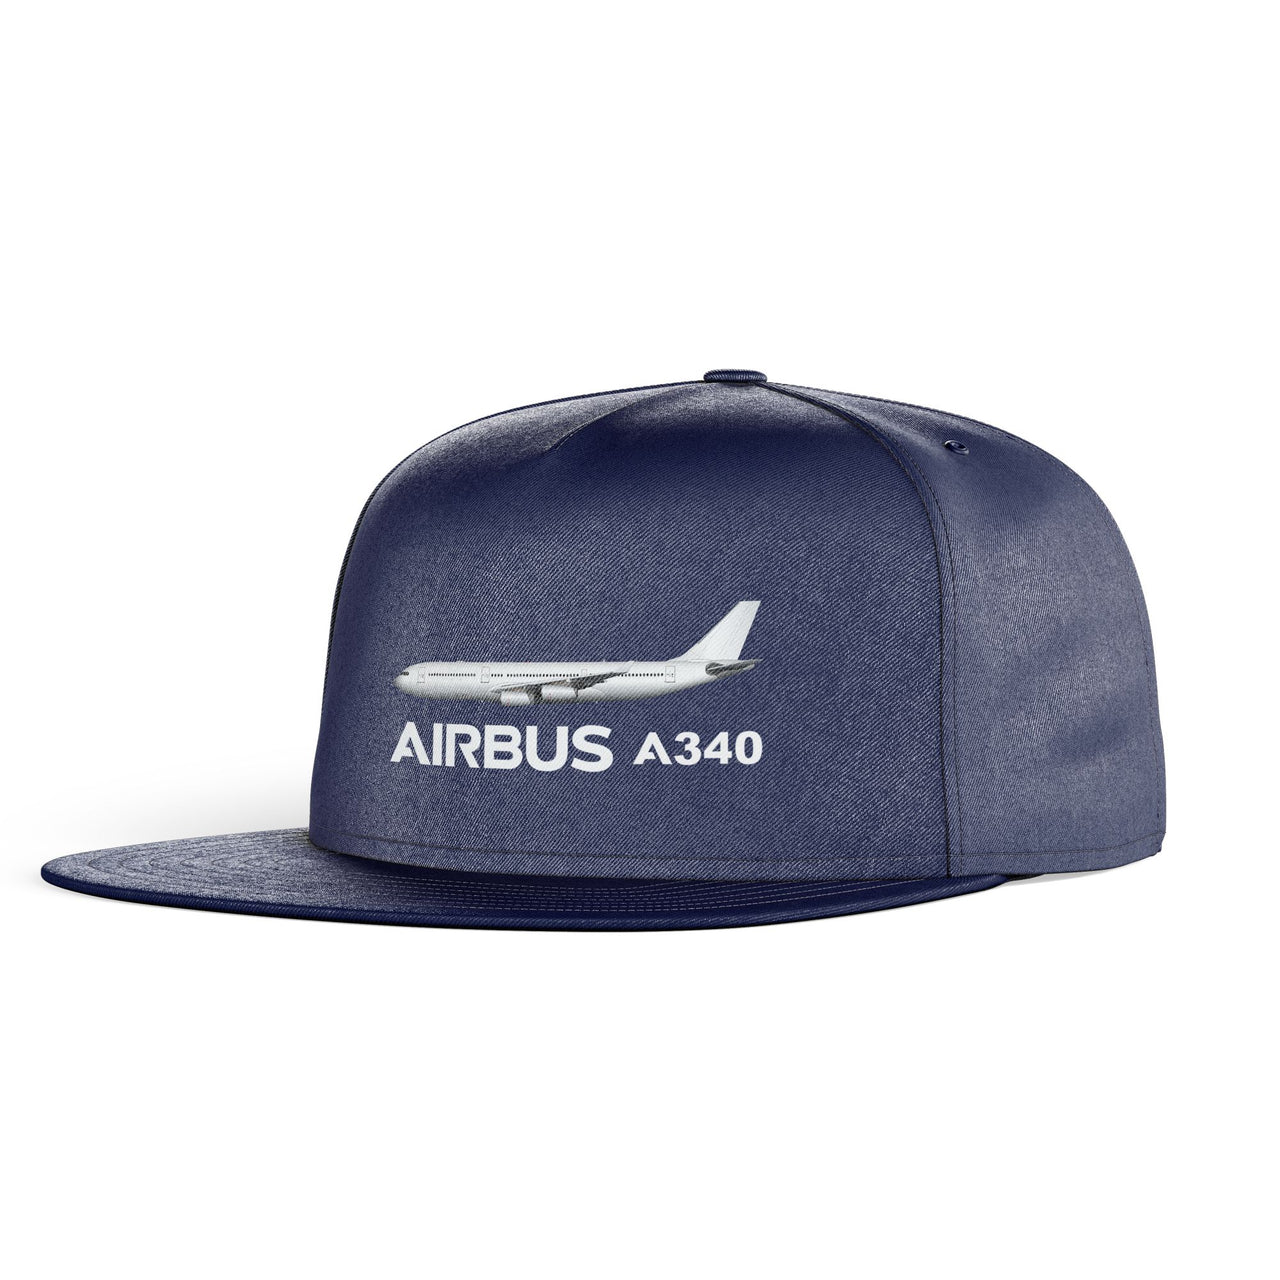 The Airbus A340 Designed Snapback Caps & Hats